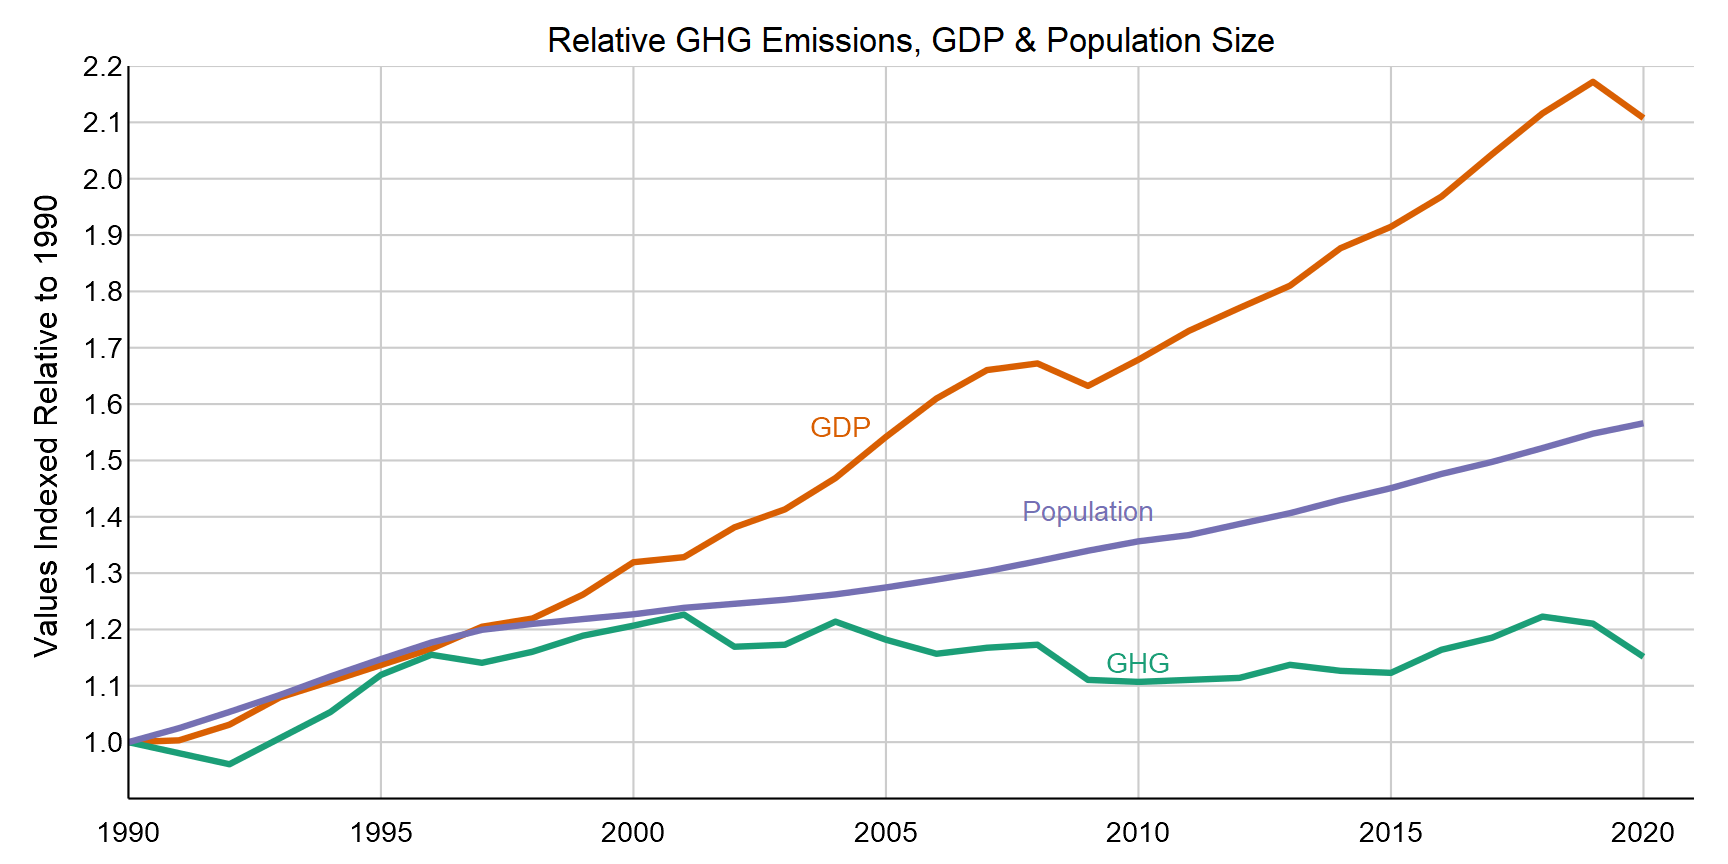 GDP, population, and greenhouse gas emissions are plotted as three separate lines from 1990 to 2020.